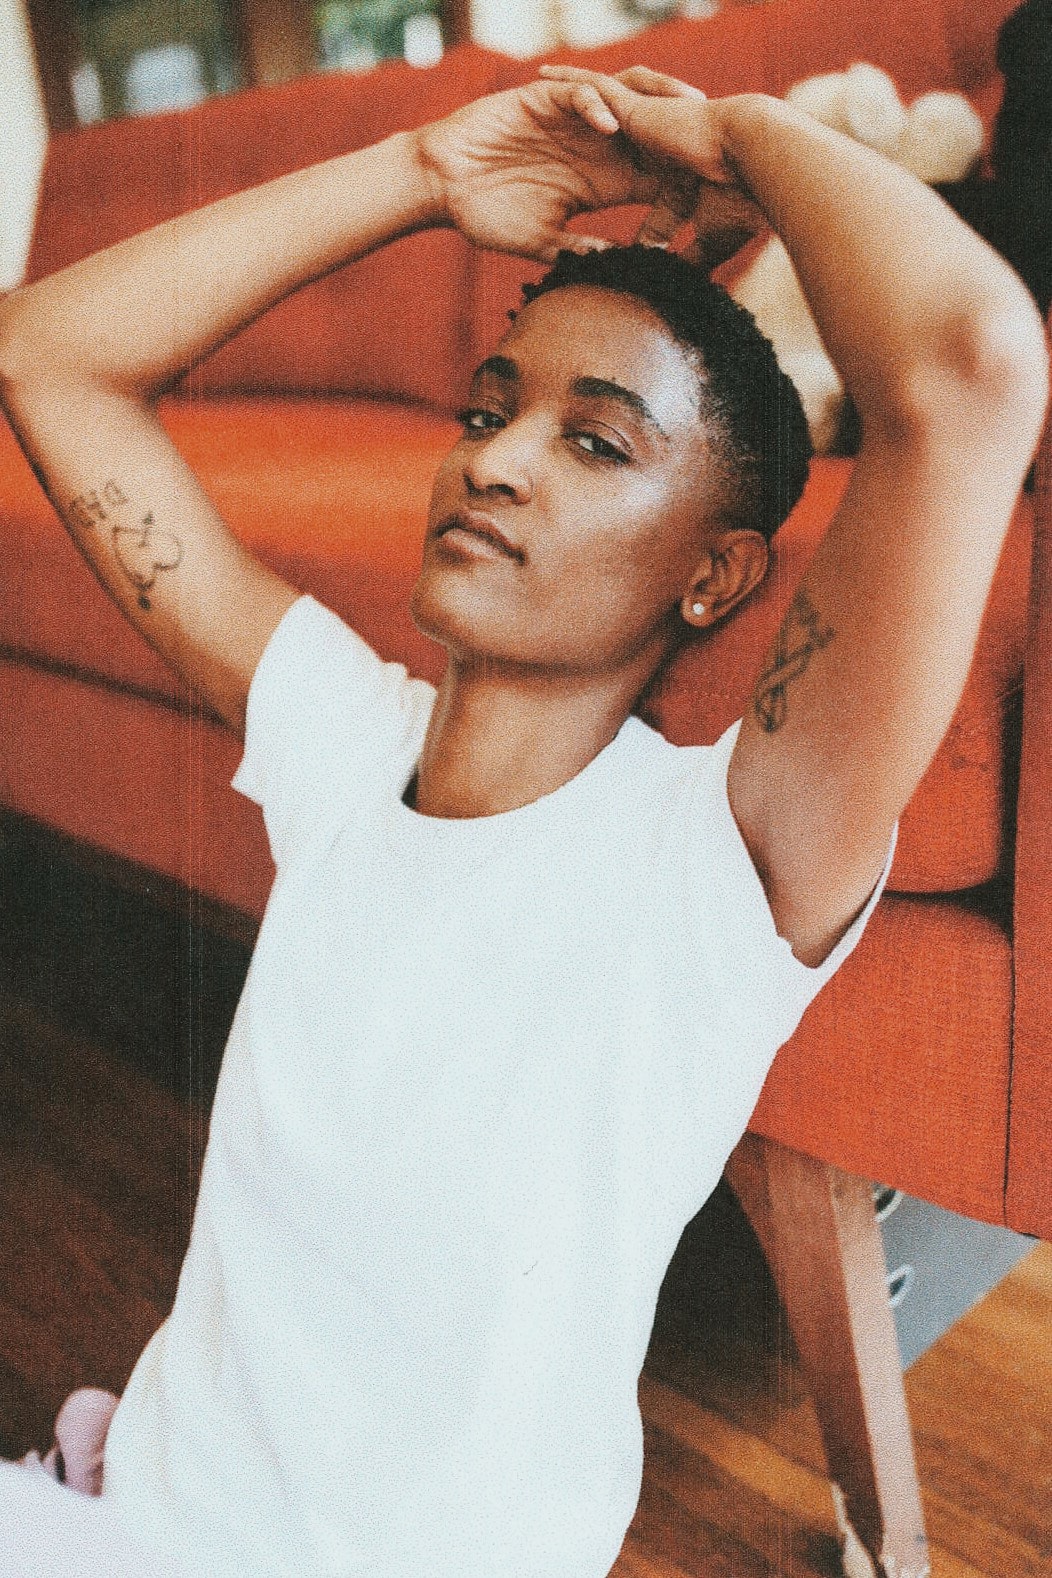 Syd tha Kyd The Internet Missing Out New Single Music Artist